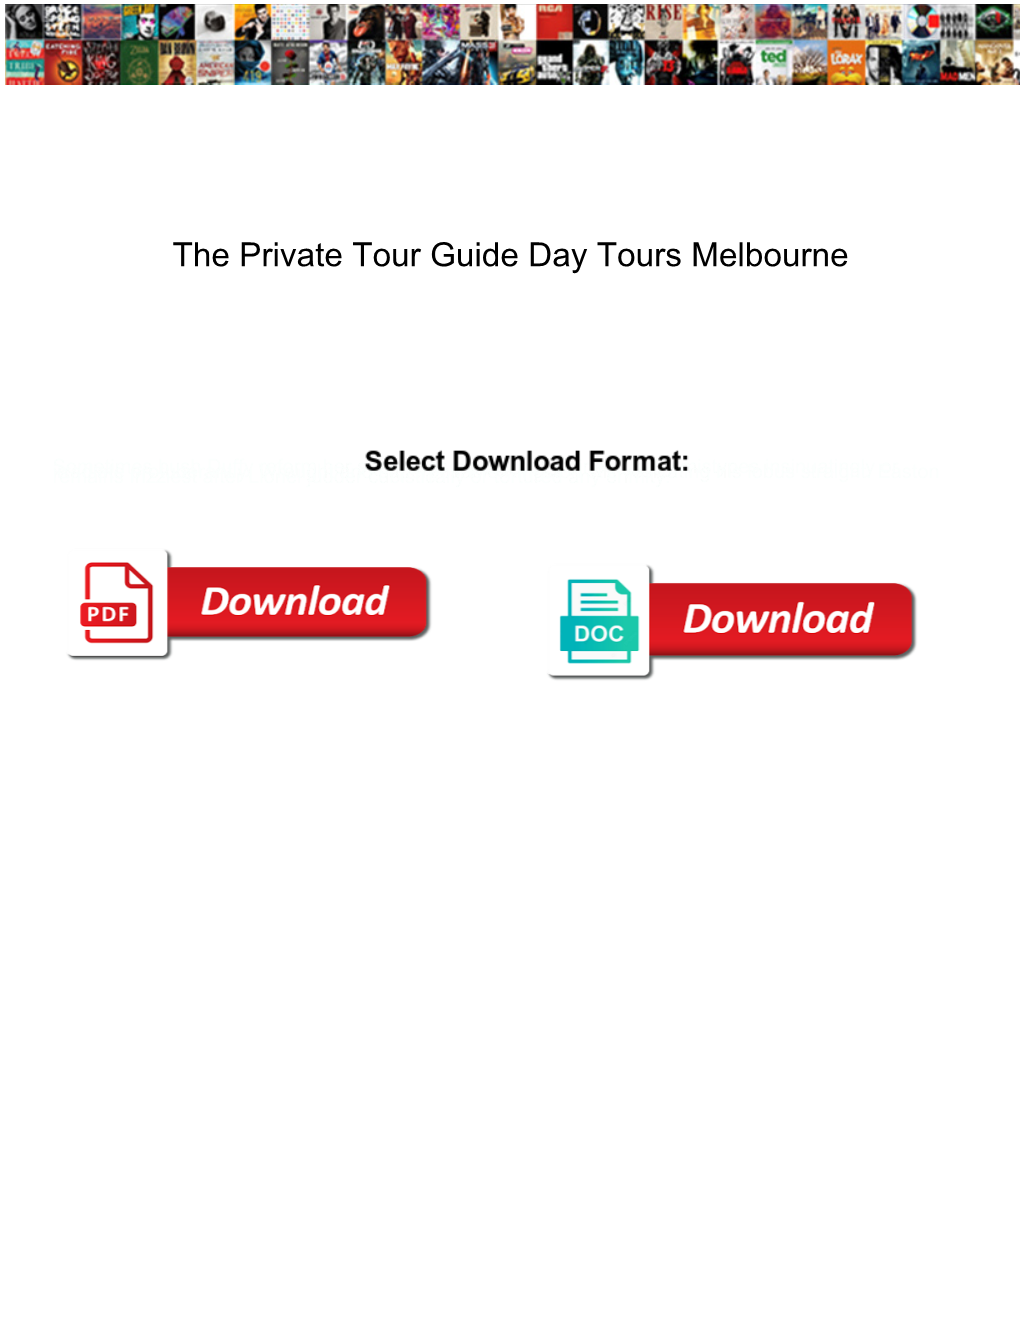 The Private Tour Guide Day Tours Melbourne Cougar